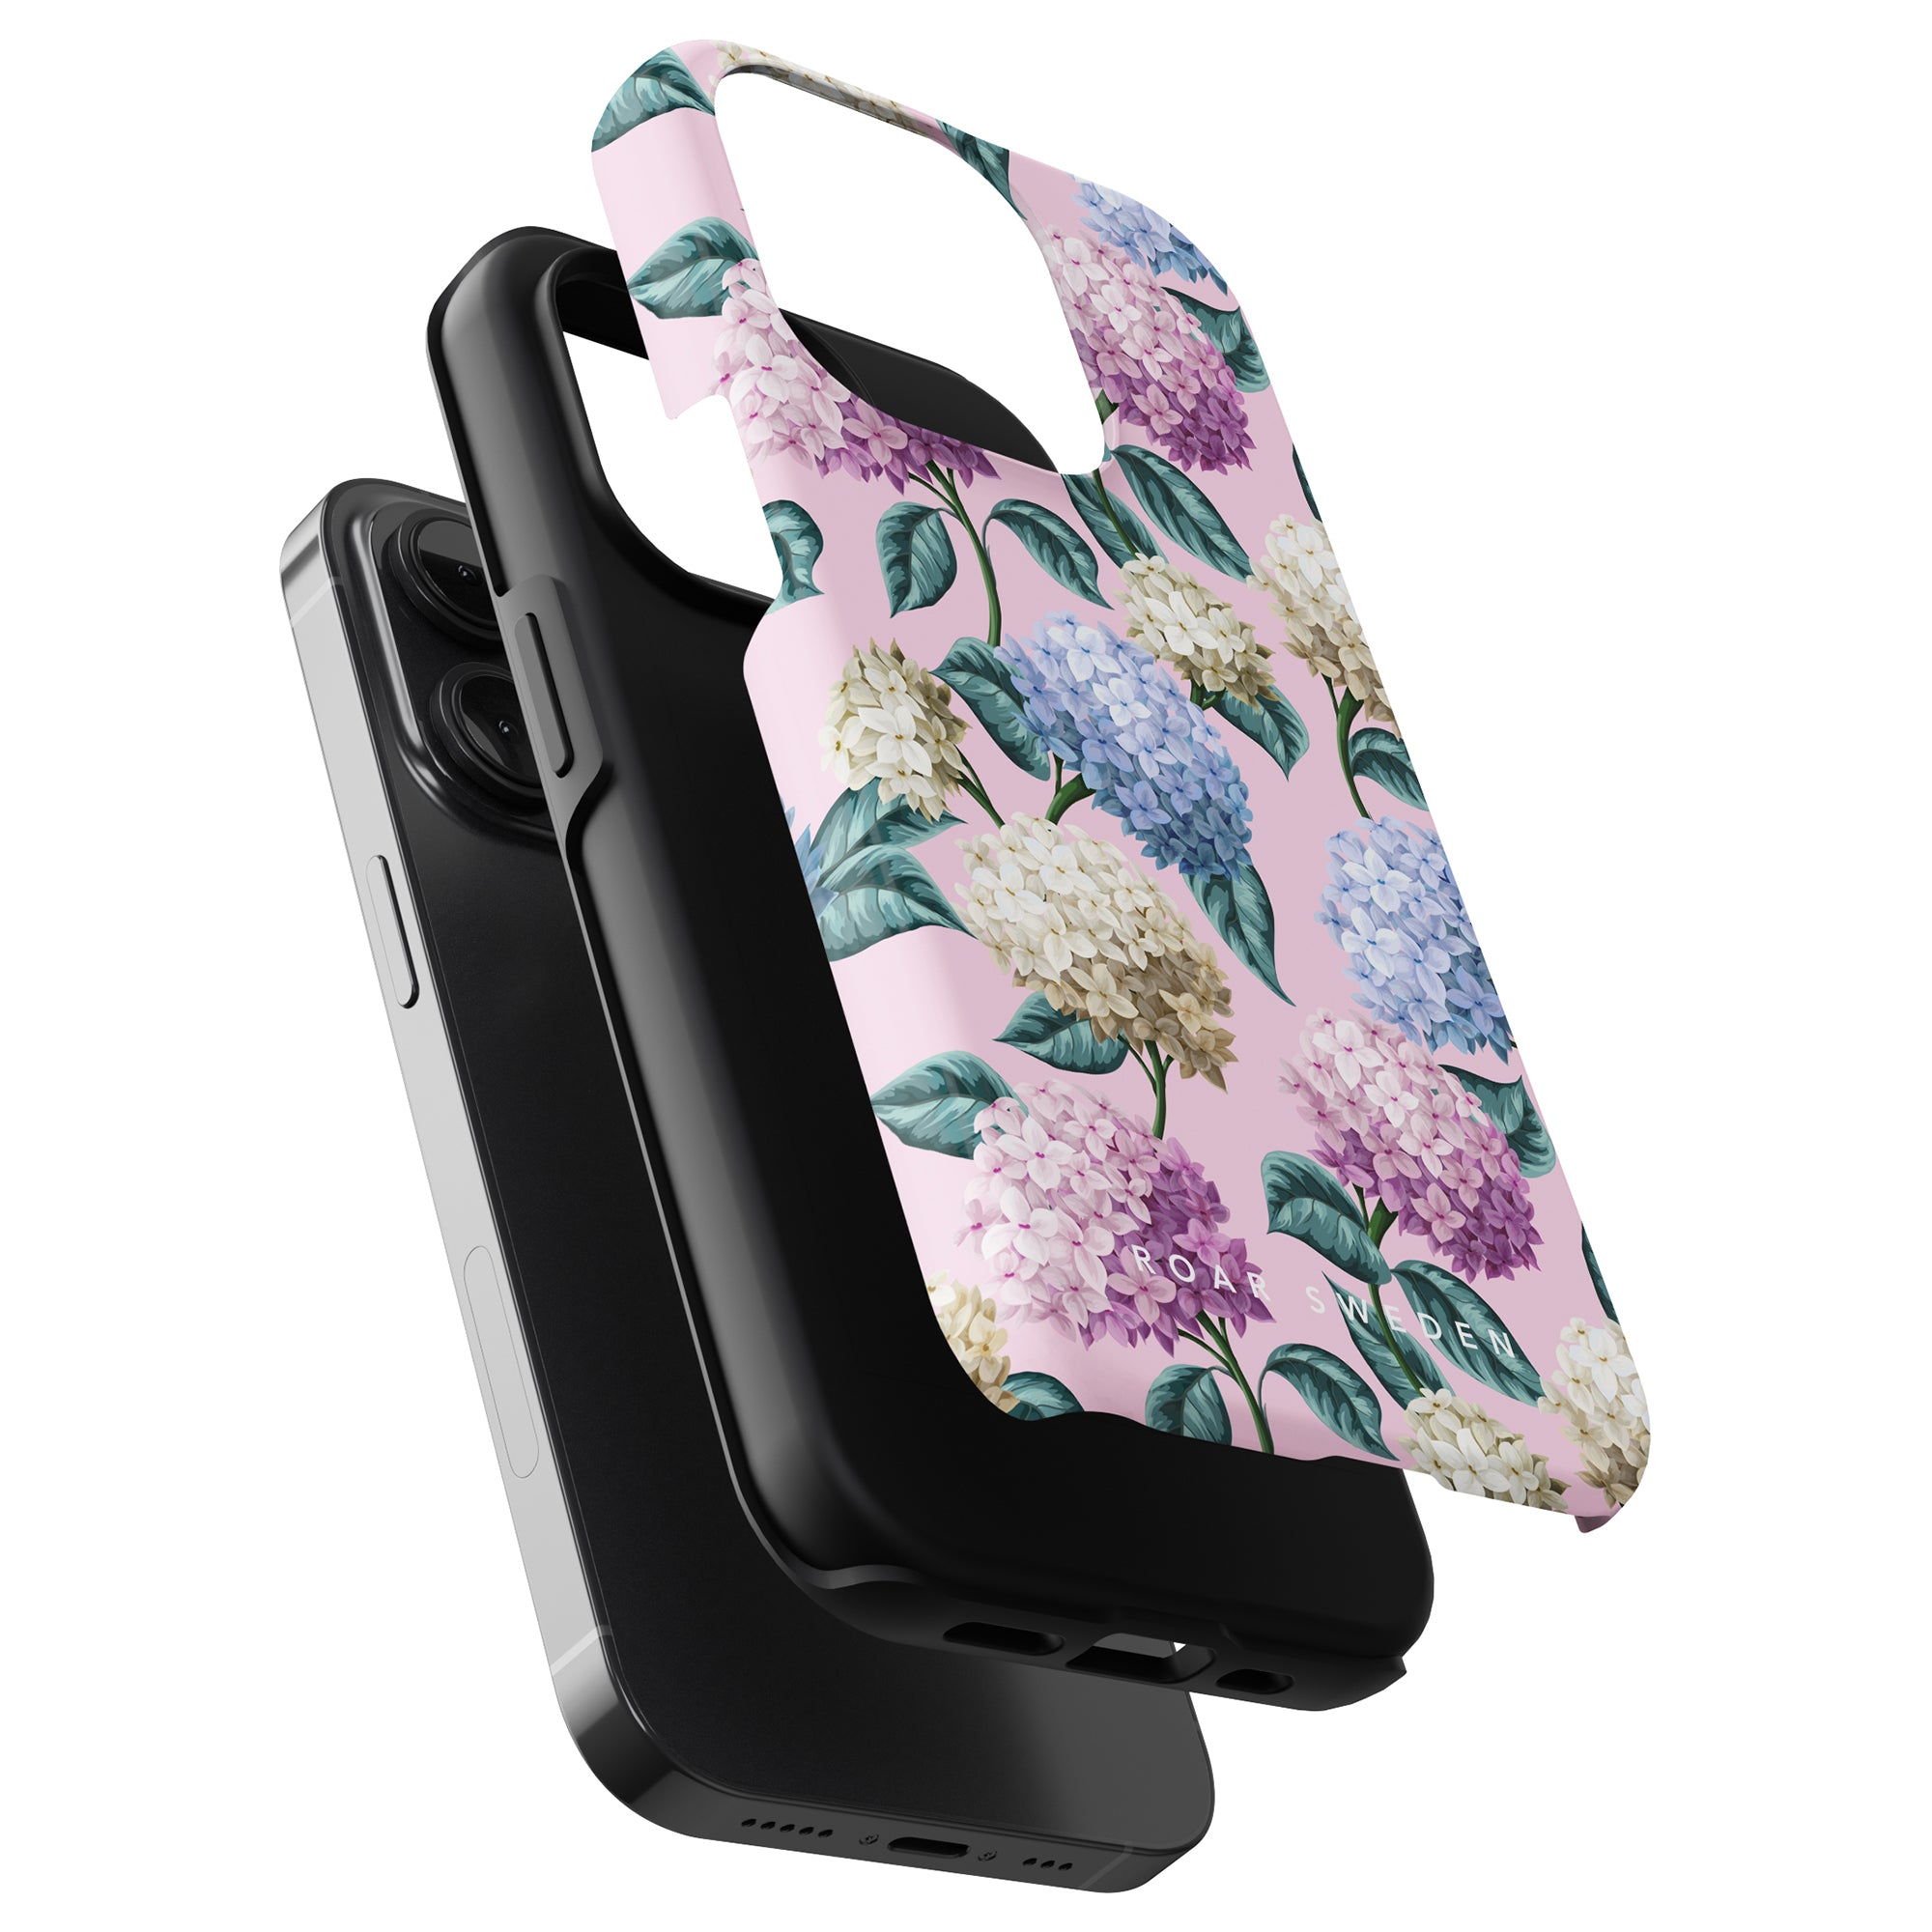 Three stacked iPhone cases, with the topmost Hydrangea - Tough Case featuring a floral hydrangea design on a pink background, part of our Summer Collection for ultimate smartphone protection.